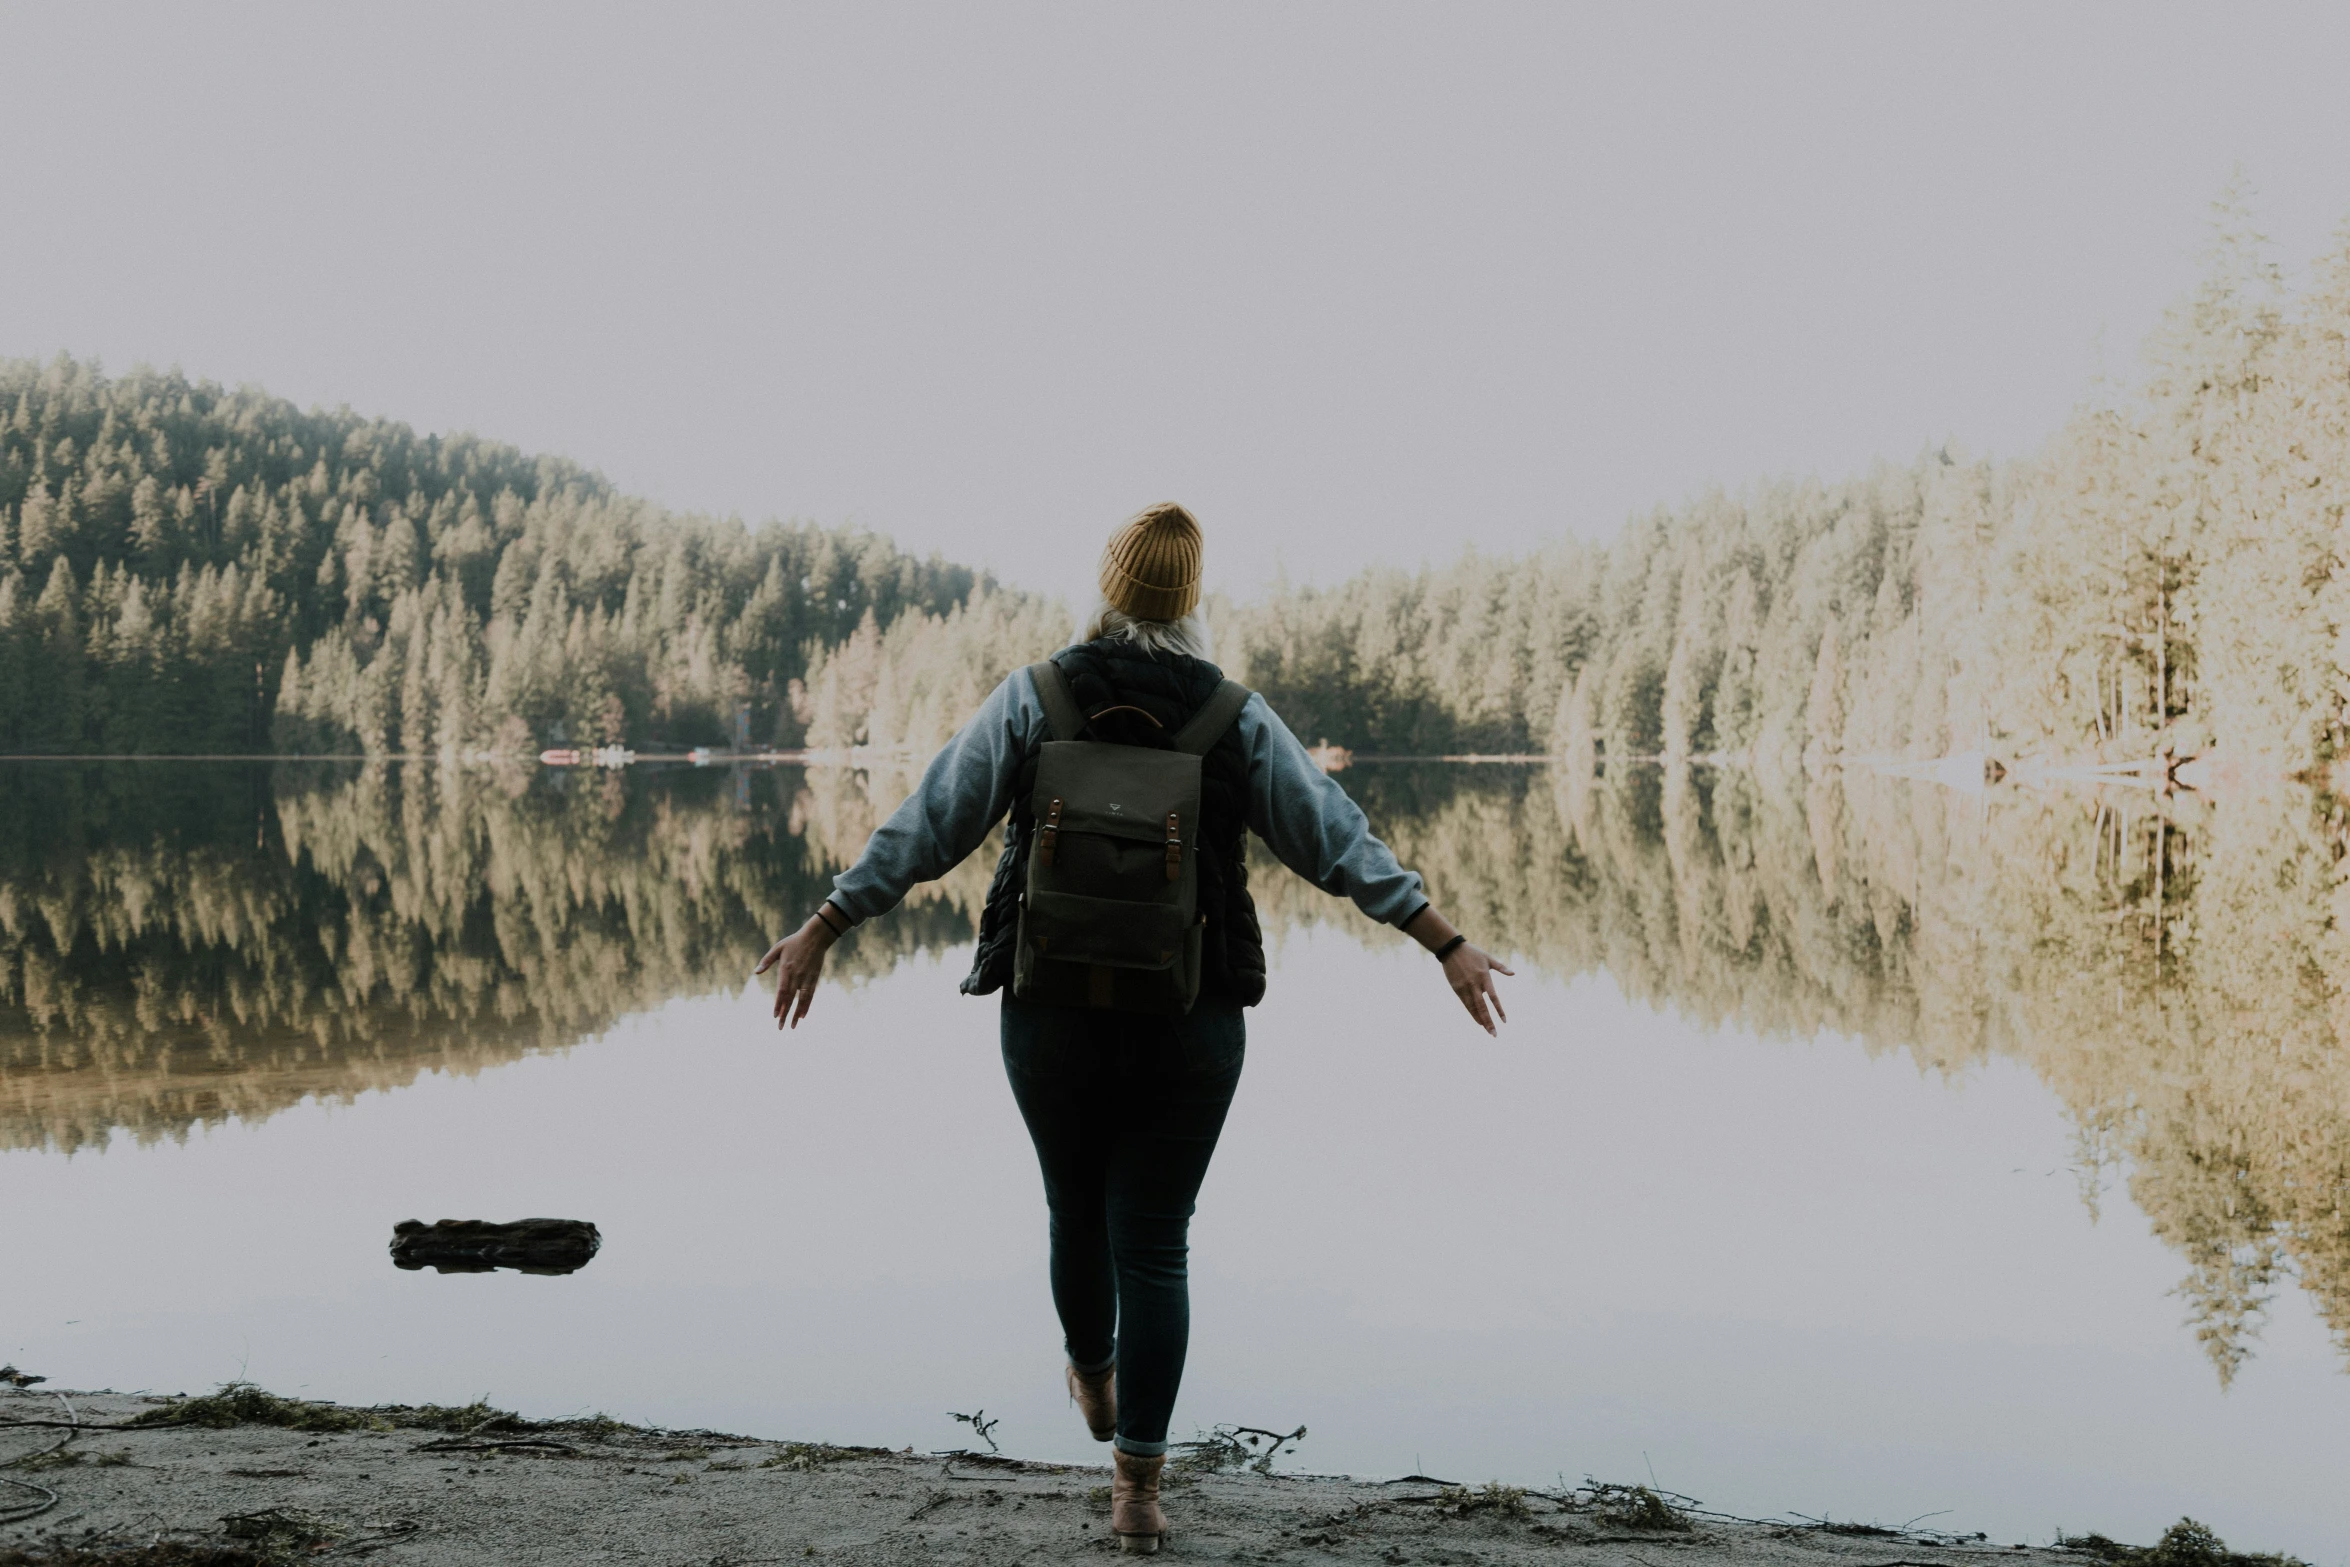 a woman with a backpack walks near a body of water